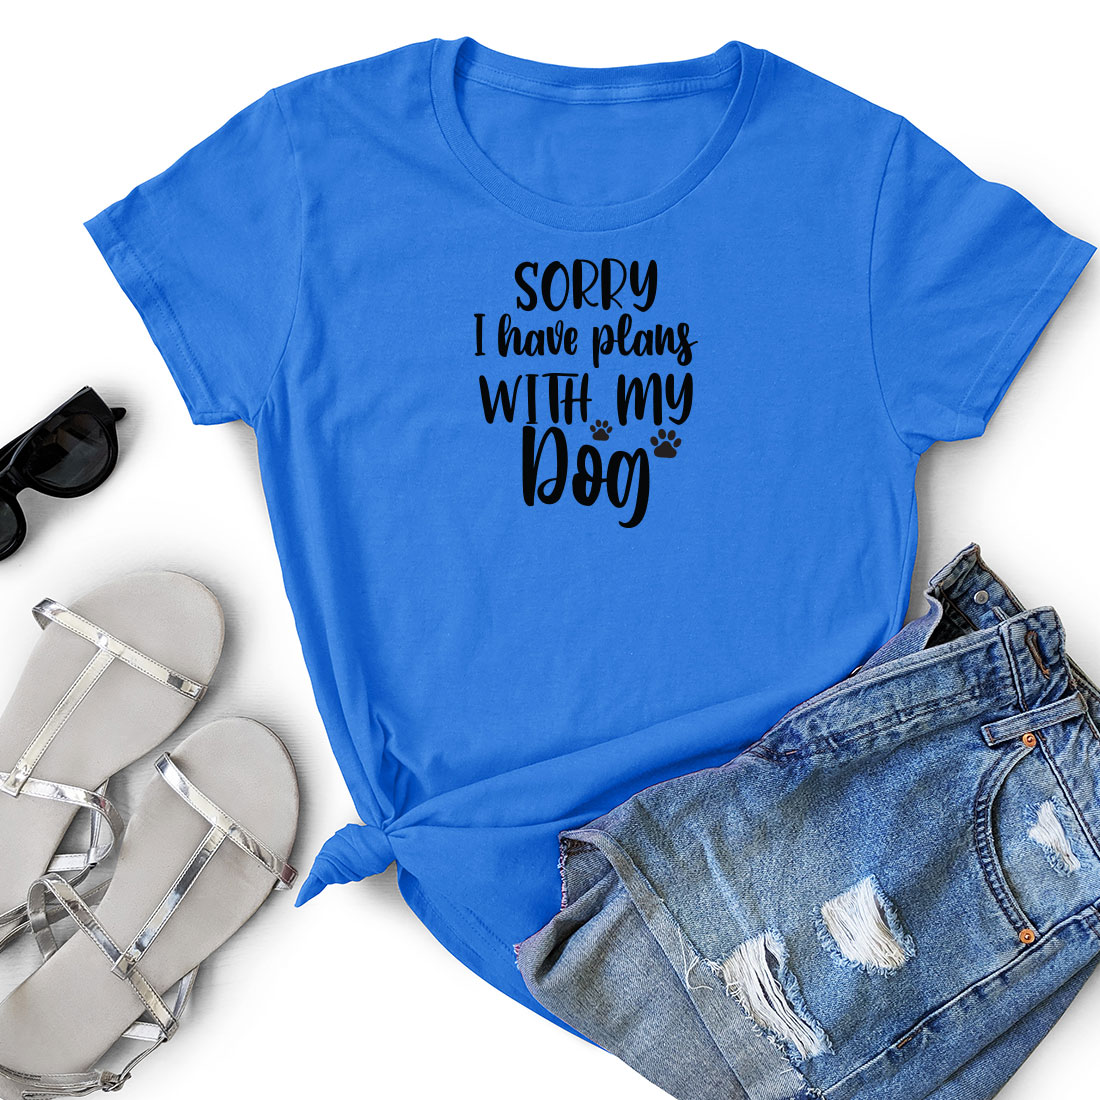 T - shirt that says sorry i have play with my dog.